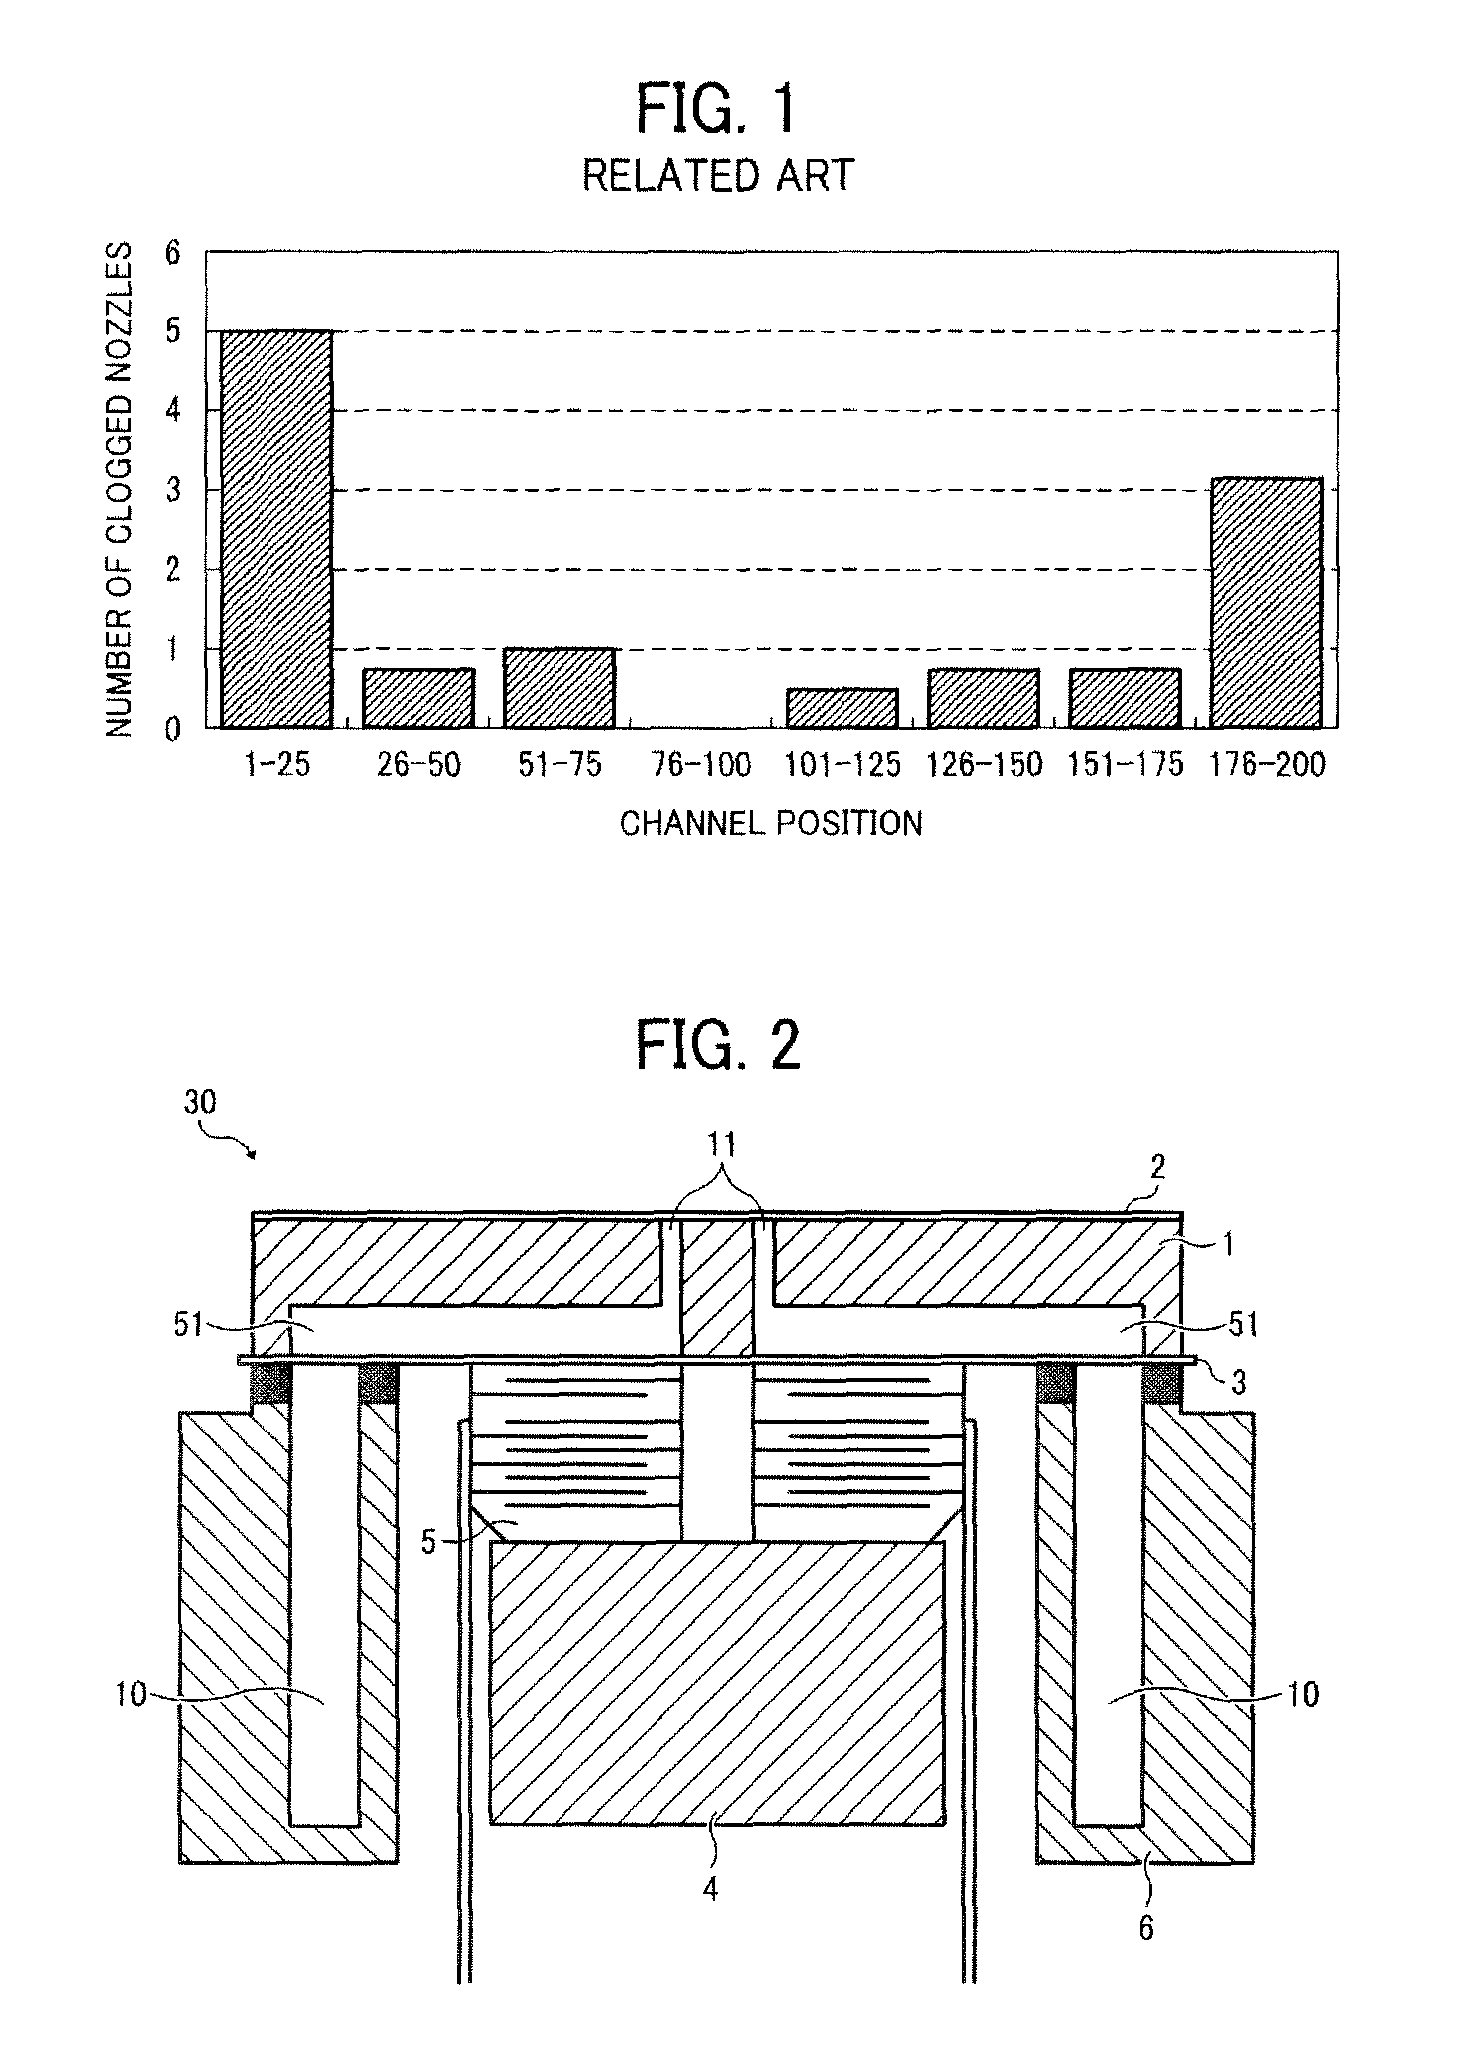 Liquid droplet ejection head, image forming apparatus including same, and method for cleaning same